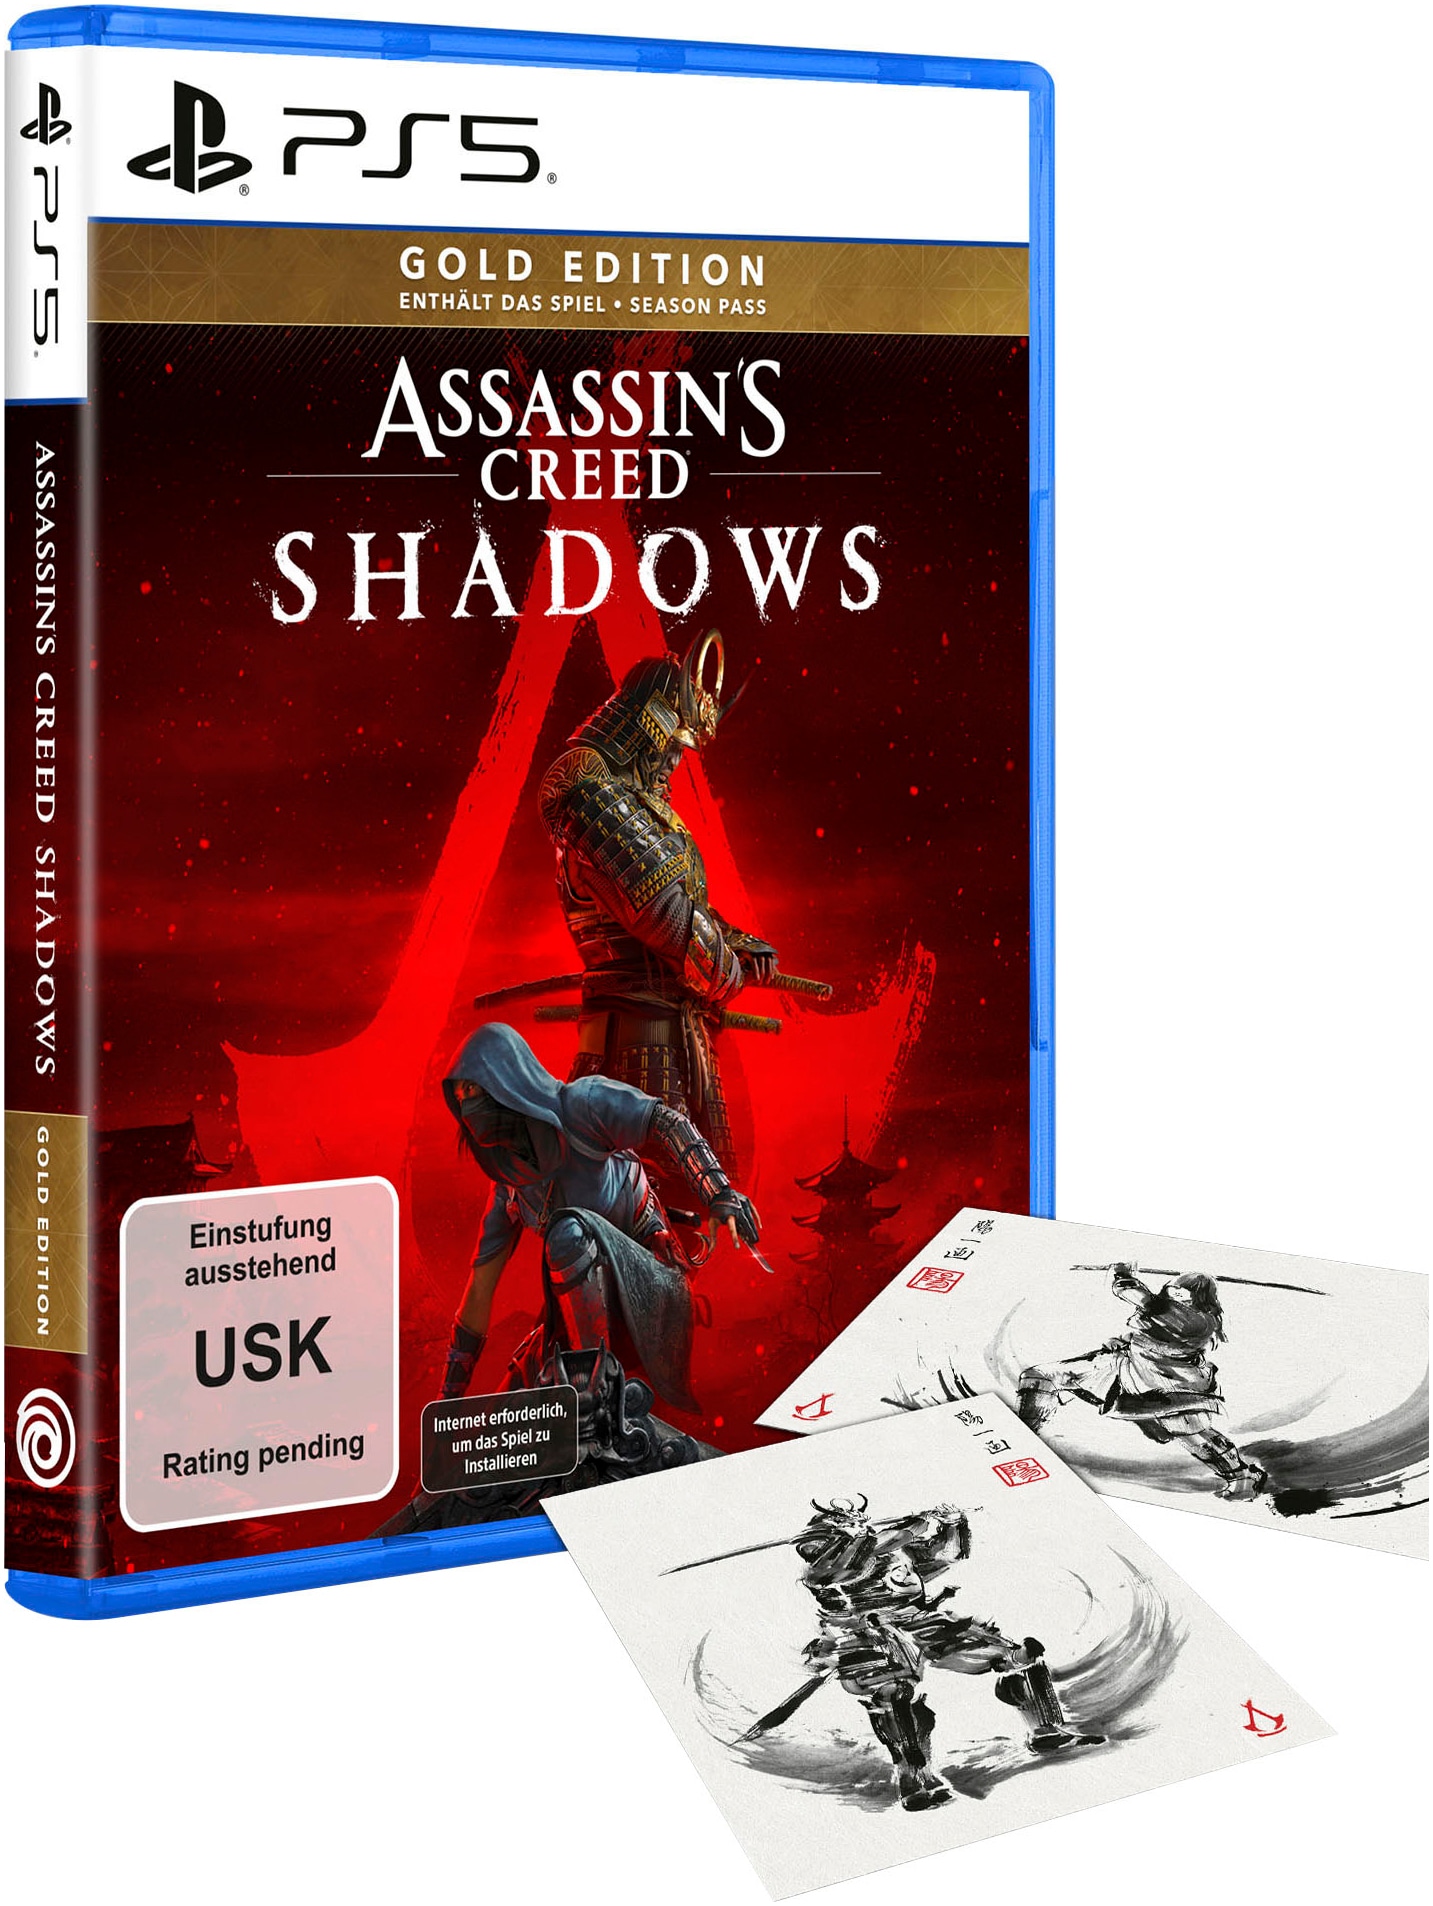 Spielesoftware »Assassin's Creed Shadows Gold Edition«, PlayStation 5